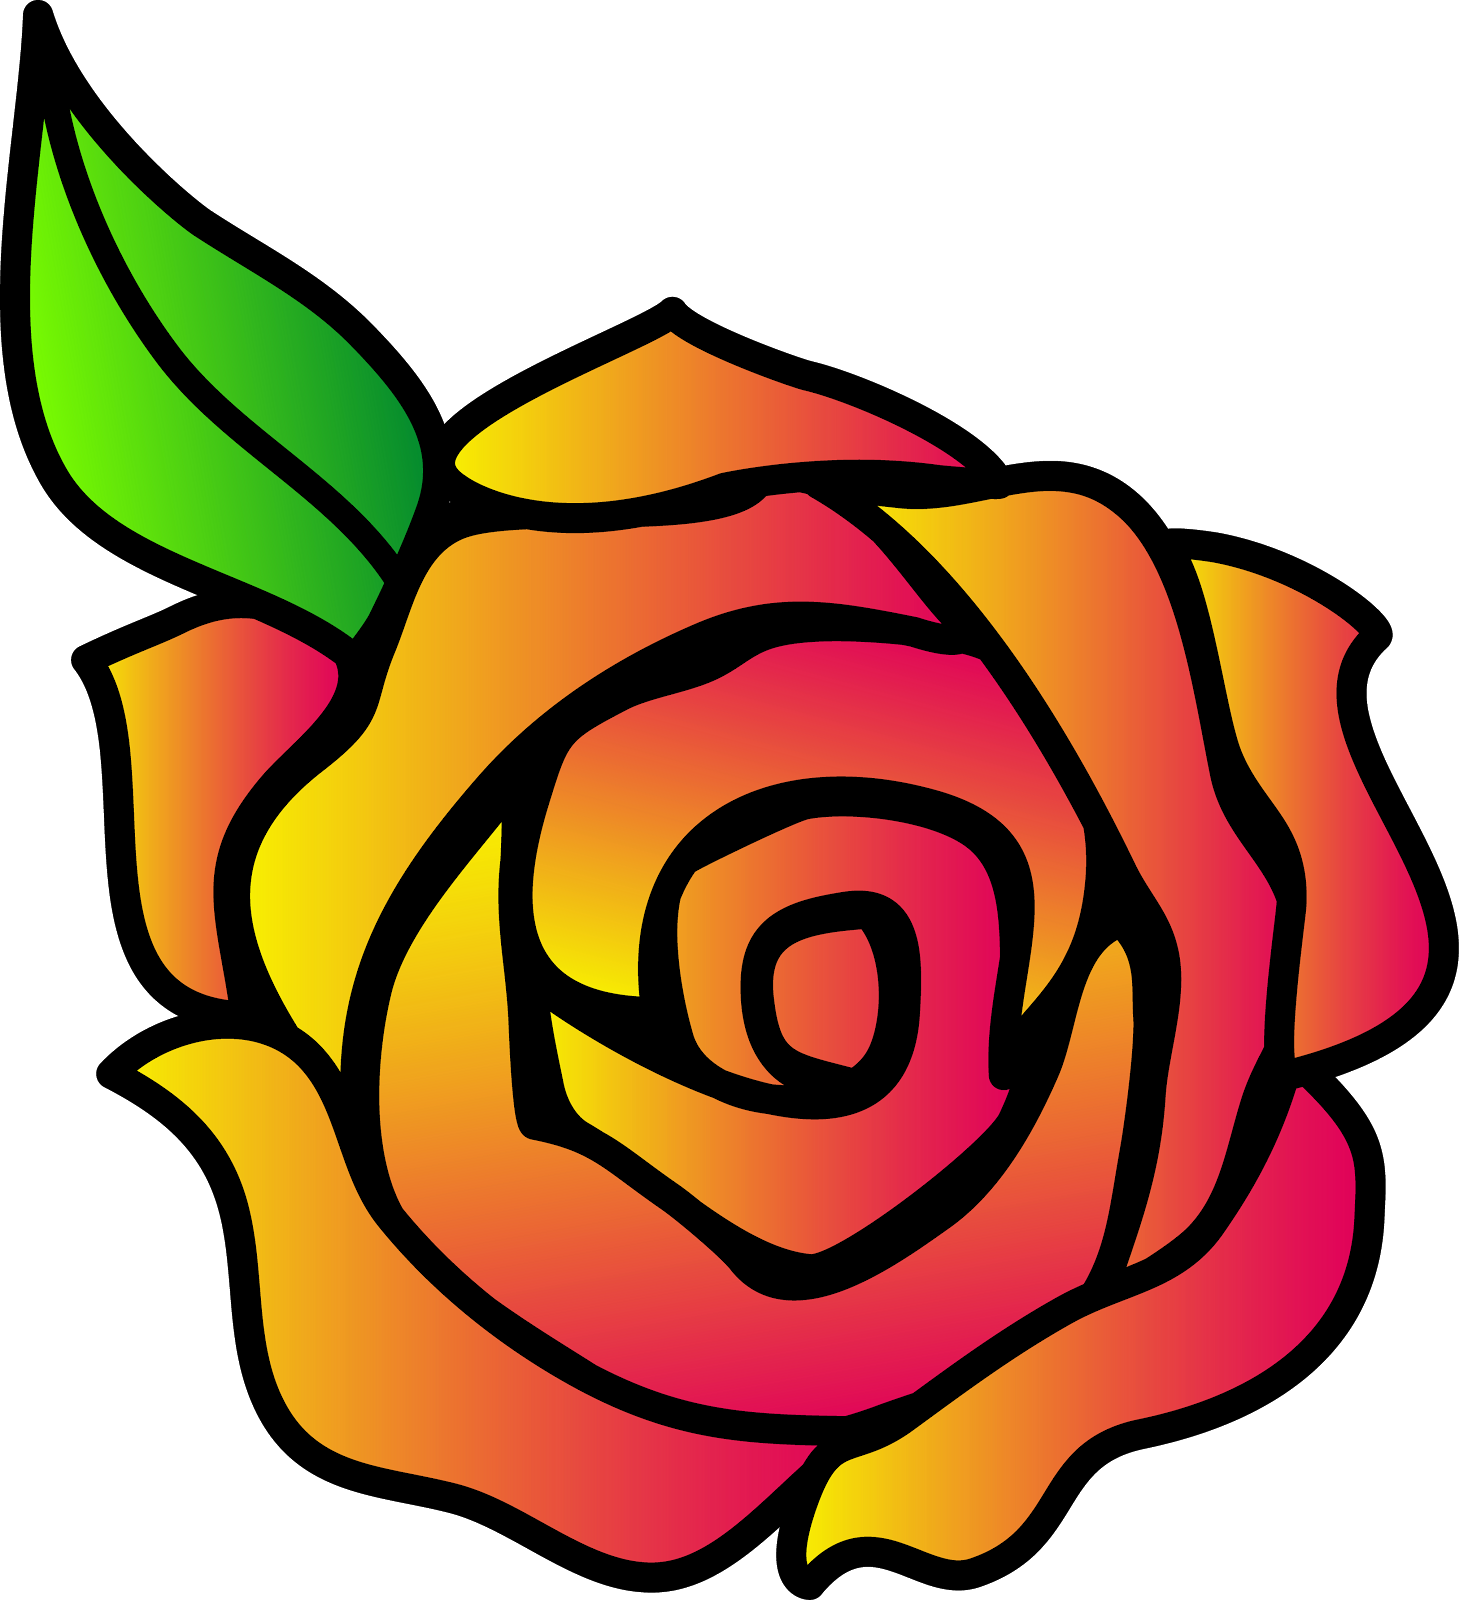 Rose Cartoon Images | Free Download Clip Art | Free Clip Art | on ...